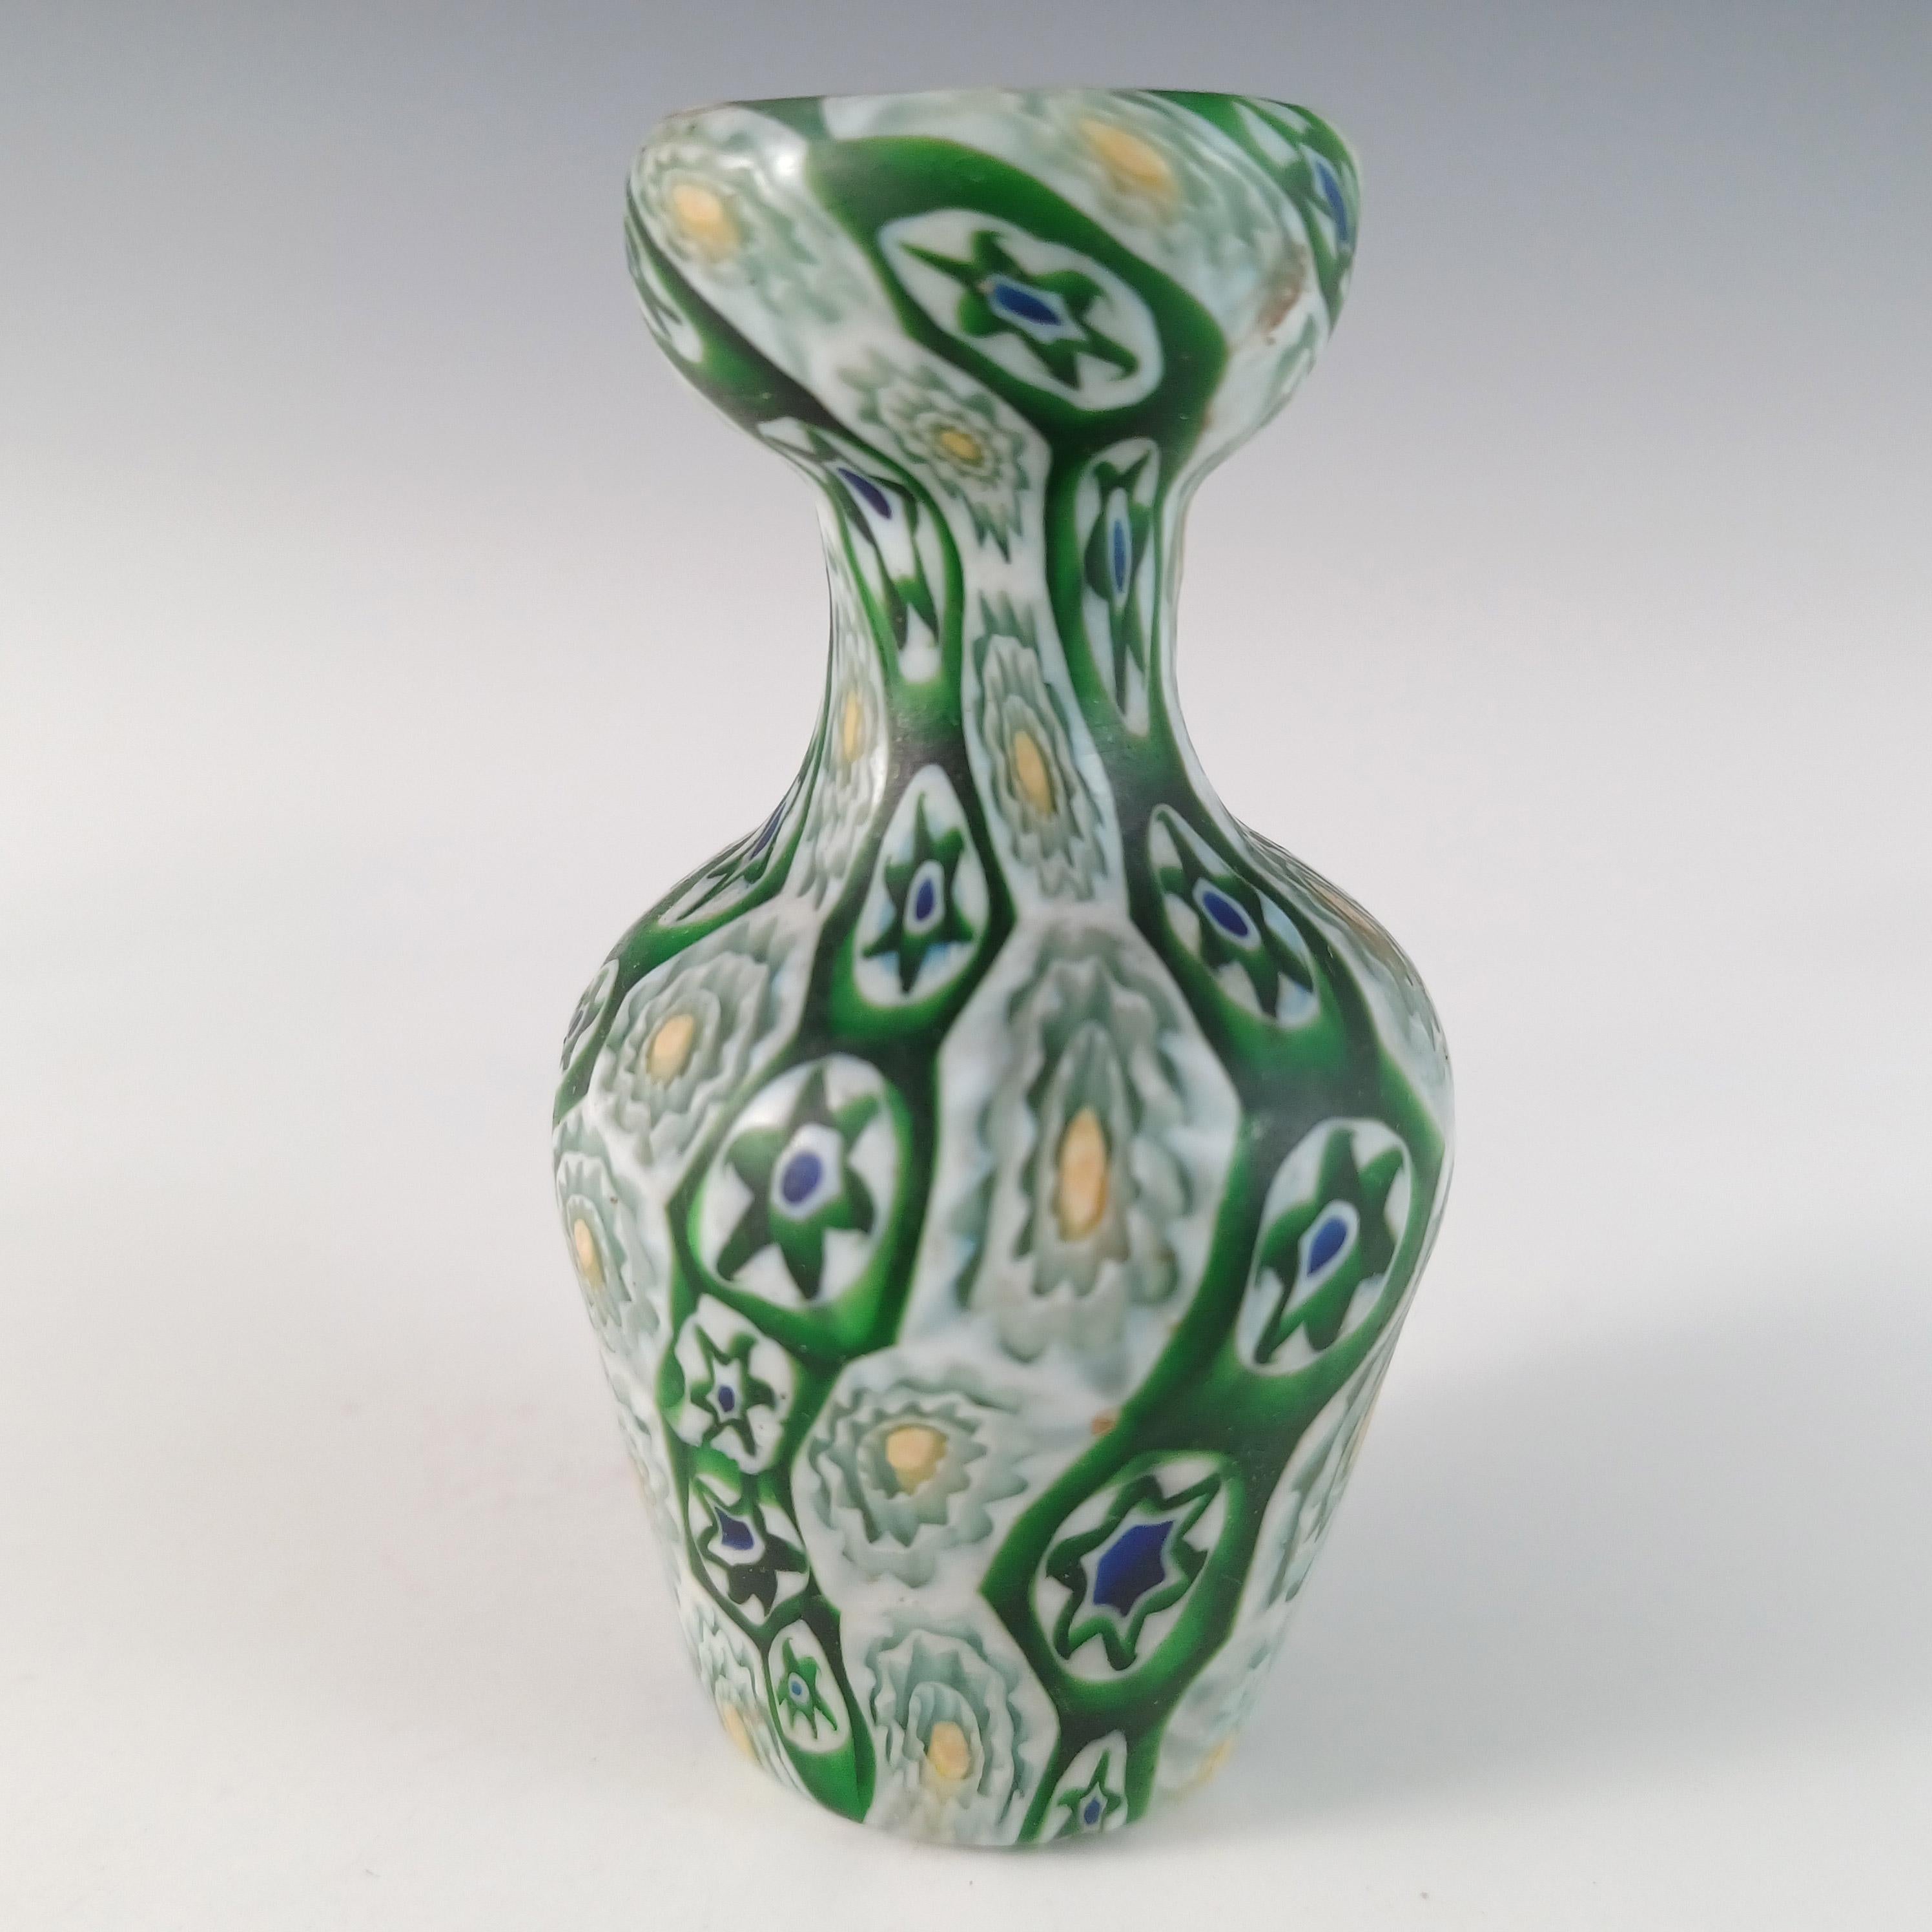 This is a magnificent Venetian glass miniature vase, circa 1900 - 1914, made on the island of Murano, near Venice, Italy. Made by Fratelli Toso, similar items are shown in the book 'Venetian Glass - Confections in Glass 1855 - 1914' by Sheldon Barr,